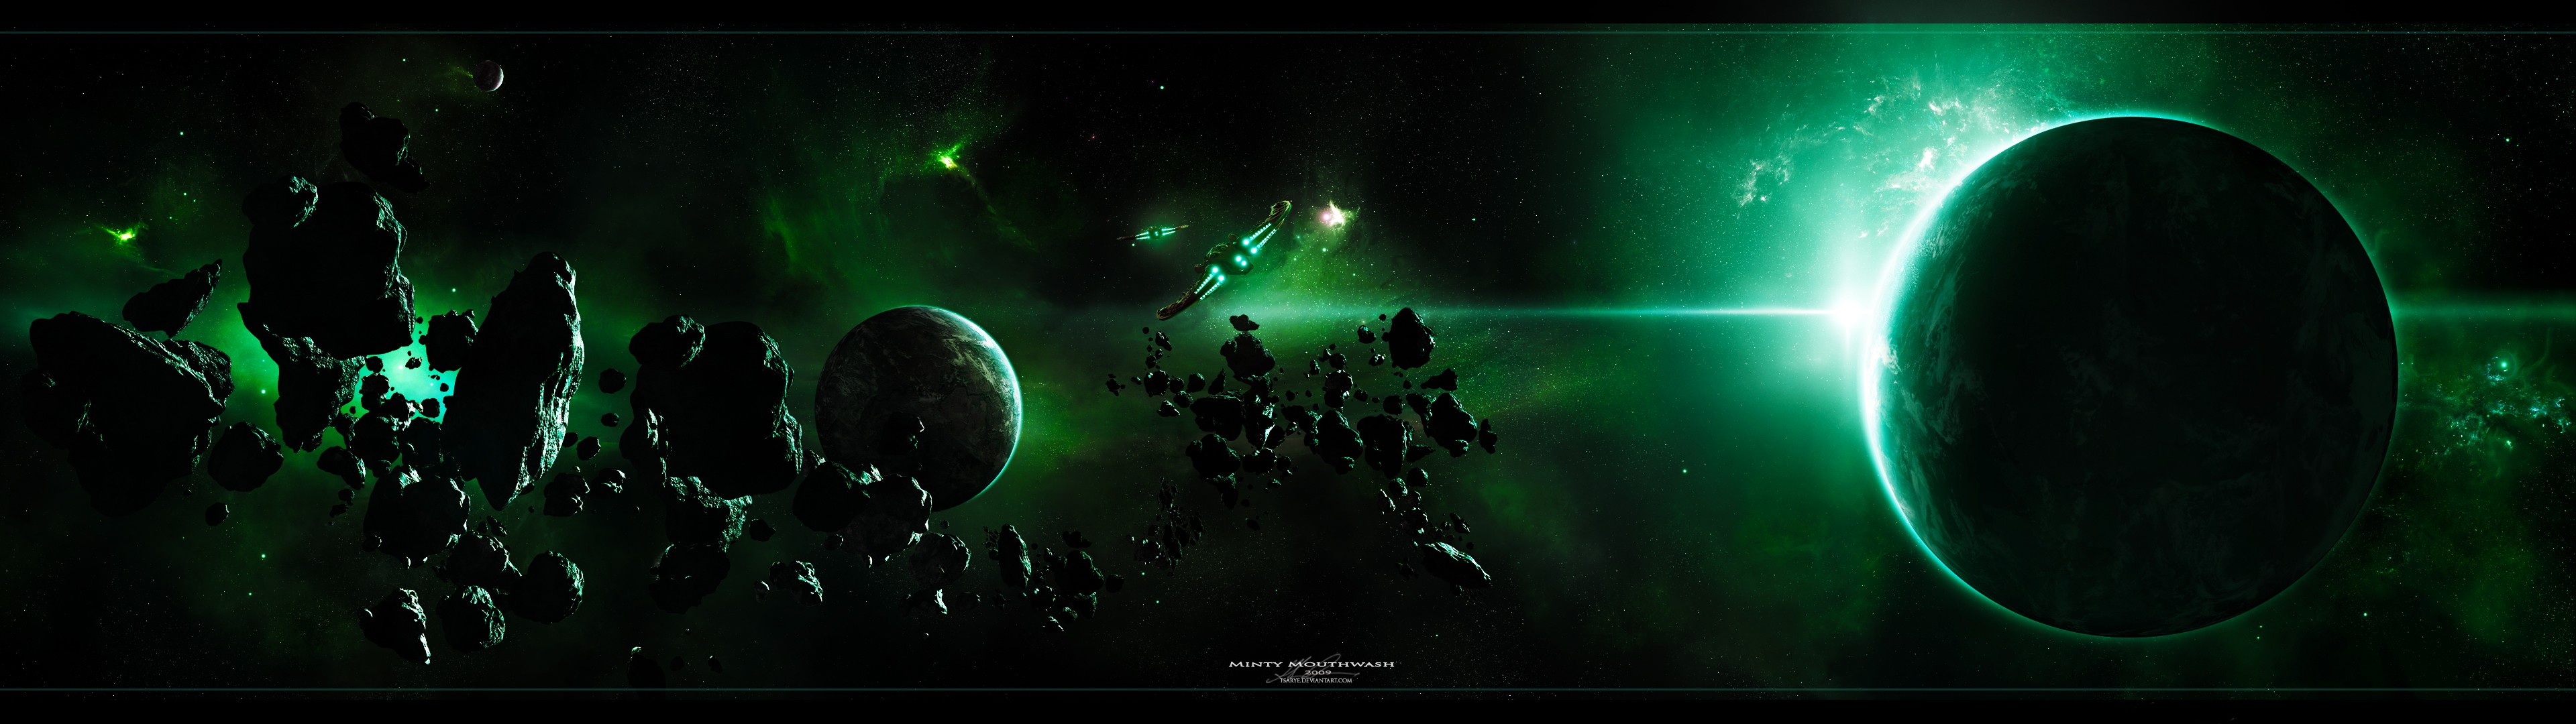 wallpaper for 2 screens,green,astronomical object,outer space,space,sky